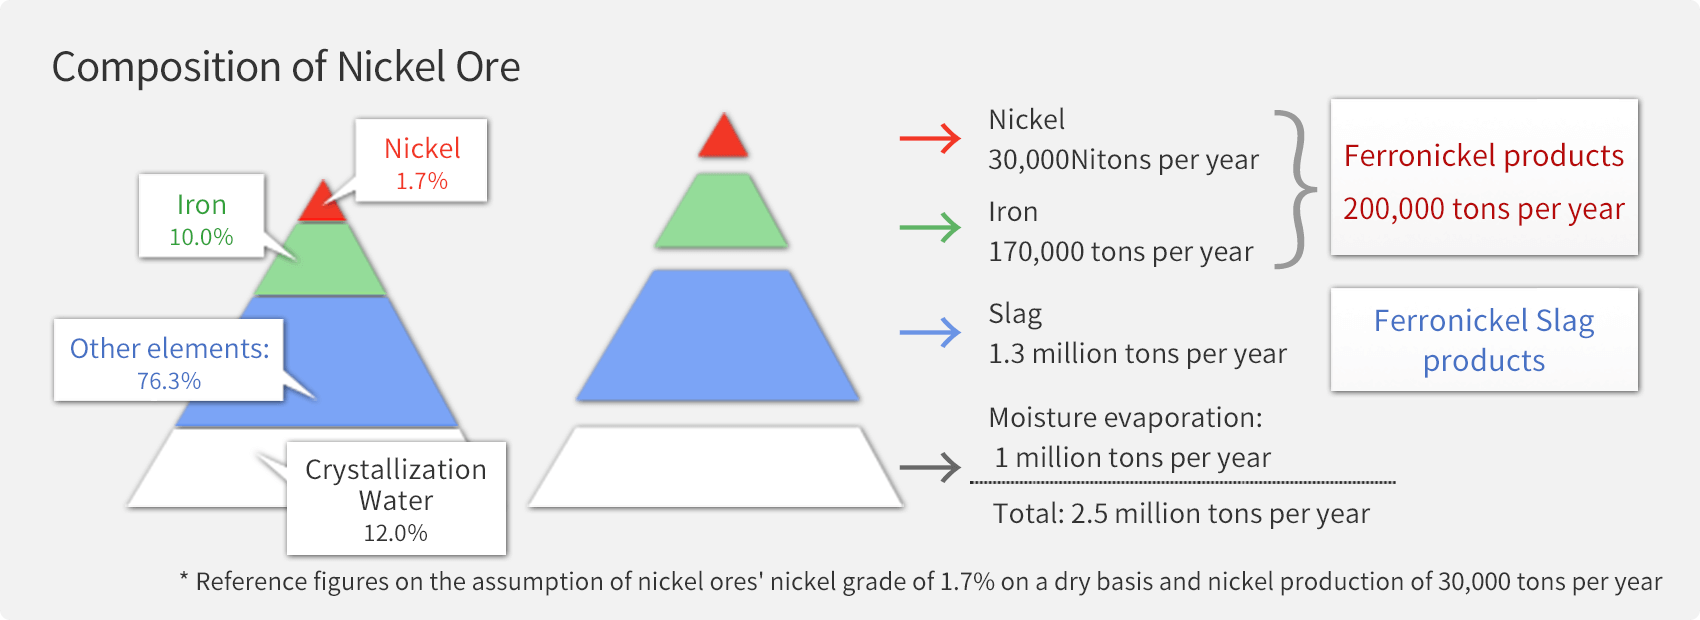 Percentages of products from 2.5 million tons of imported nickel ores with a nickel grade of 1.7%